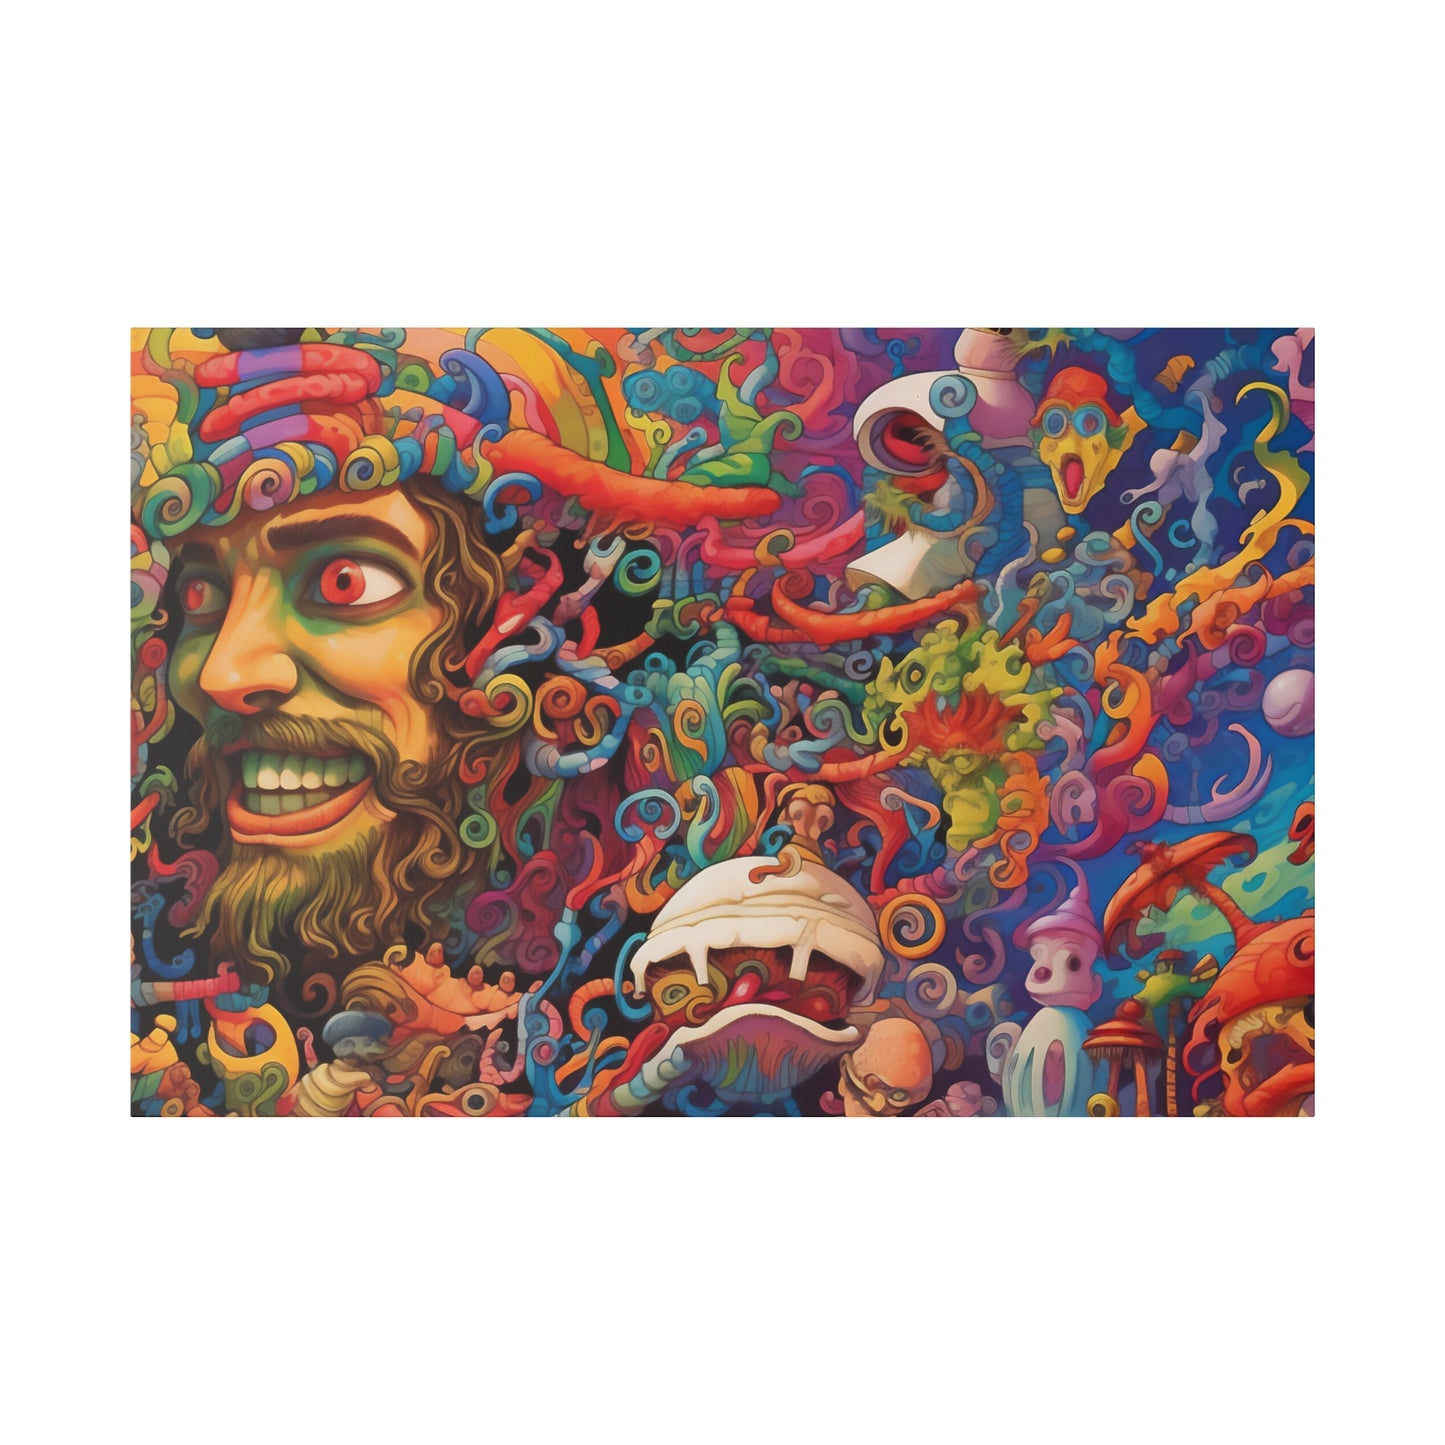 Psychedelic Experience Art Stretched Canvas Print